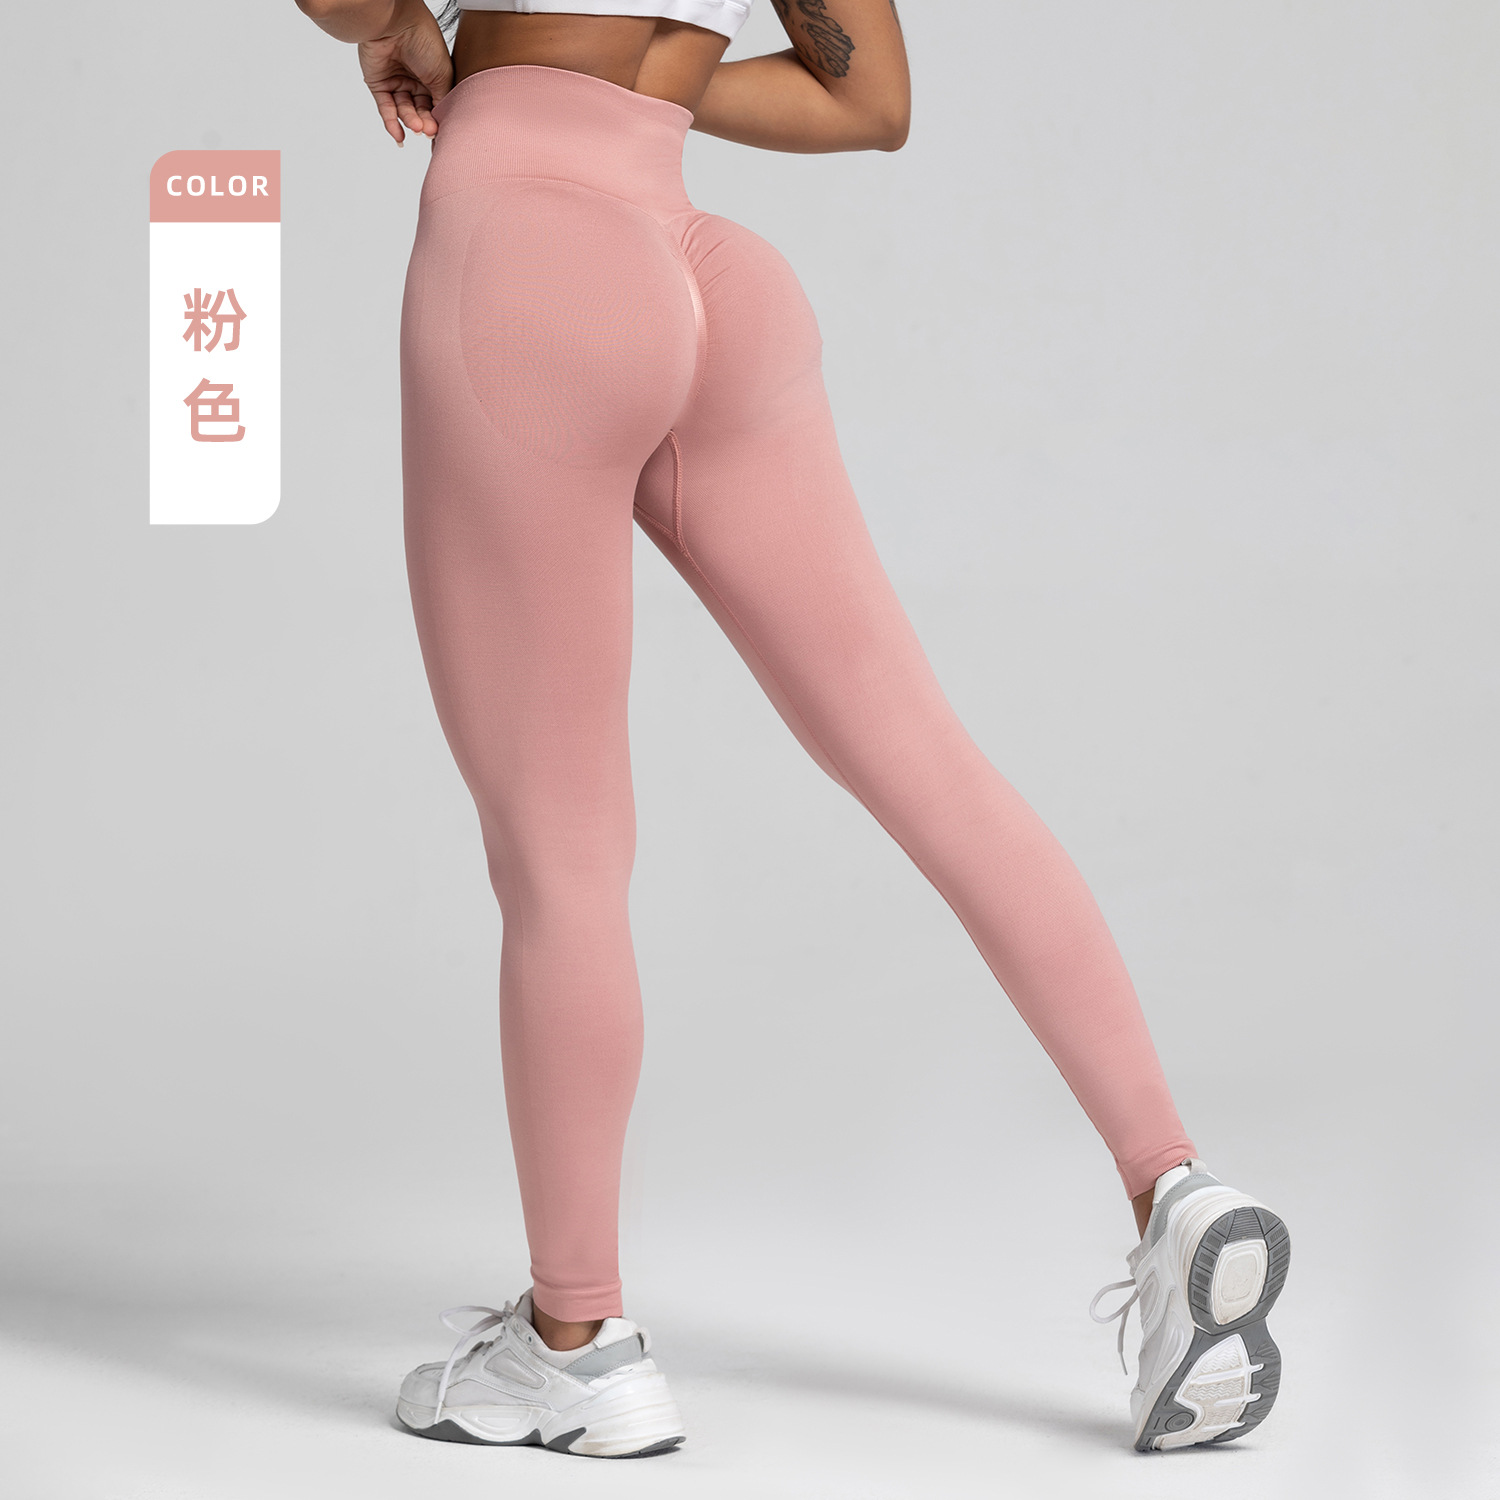 Breathable seamless yoga suit for exercise, fitness, high waist, slim fitting nylon peach hip running pants